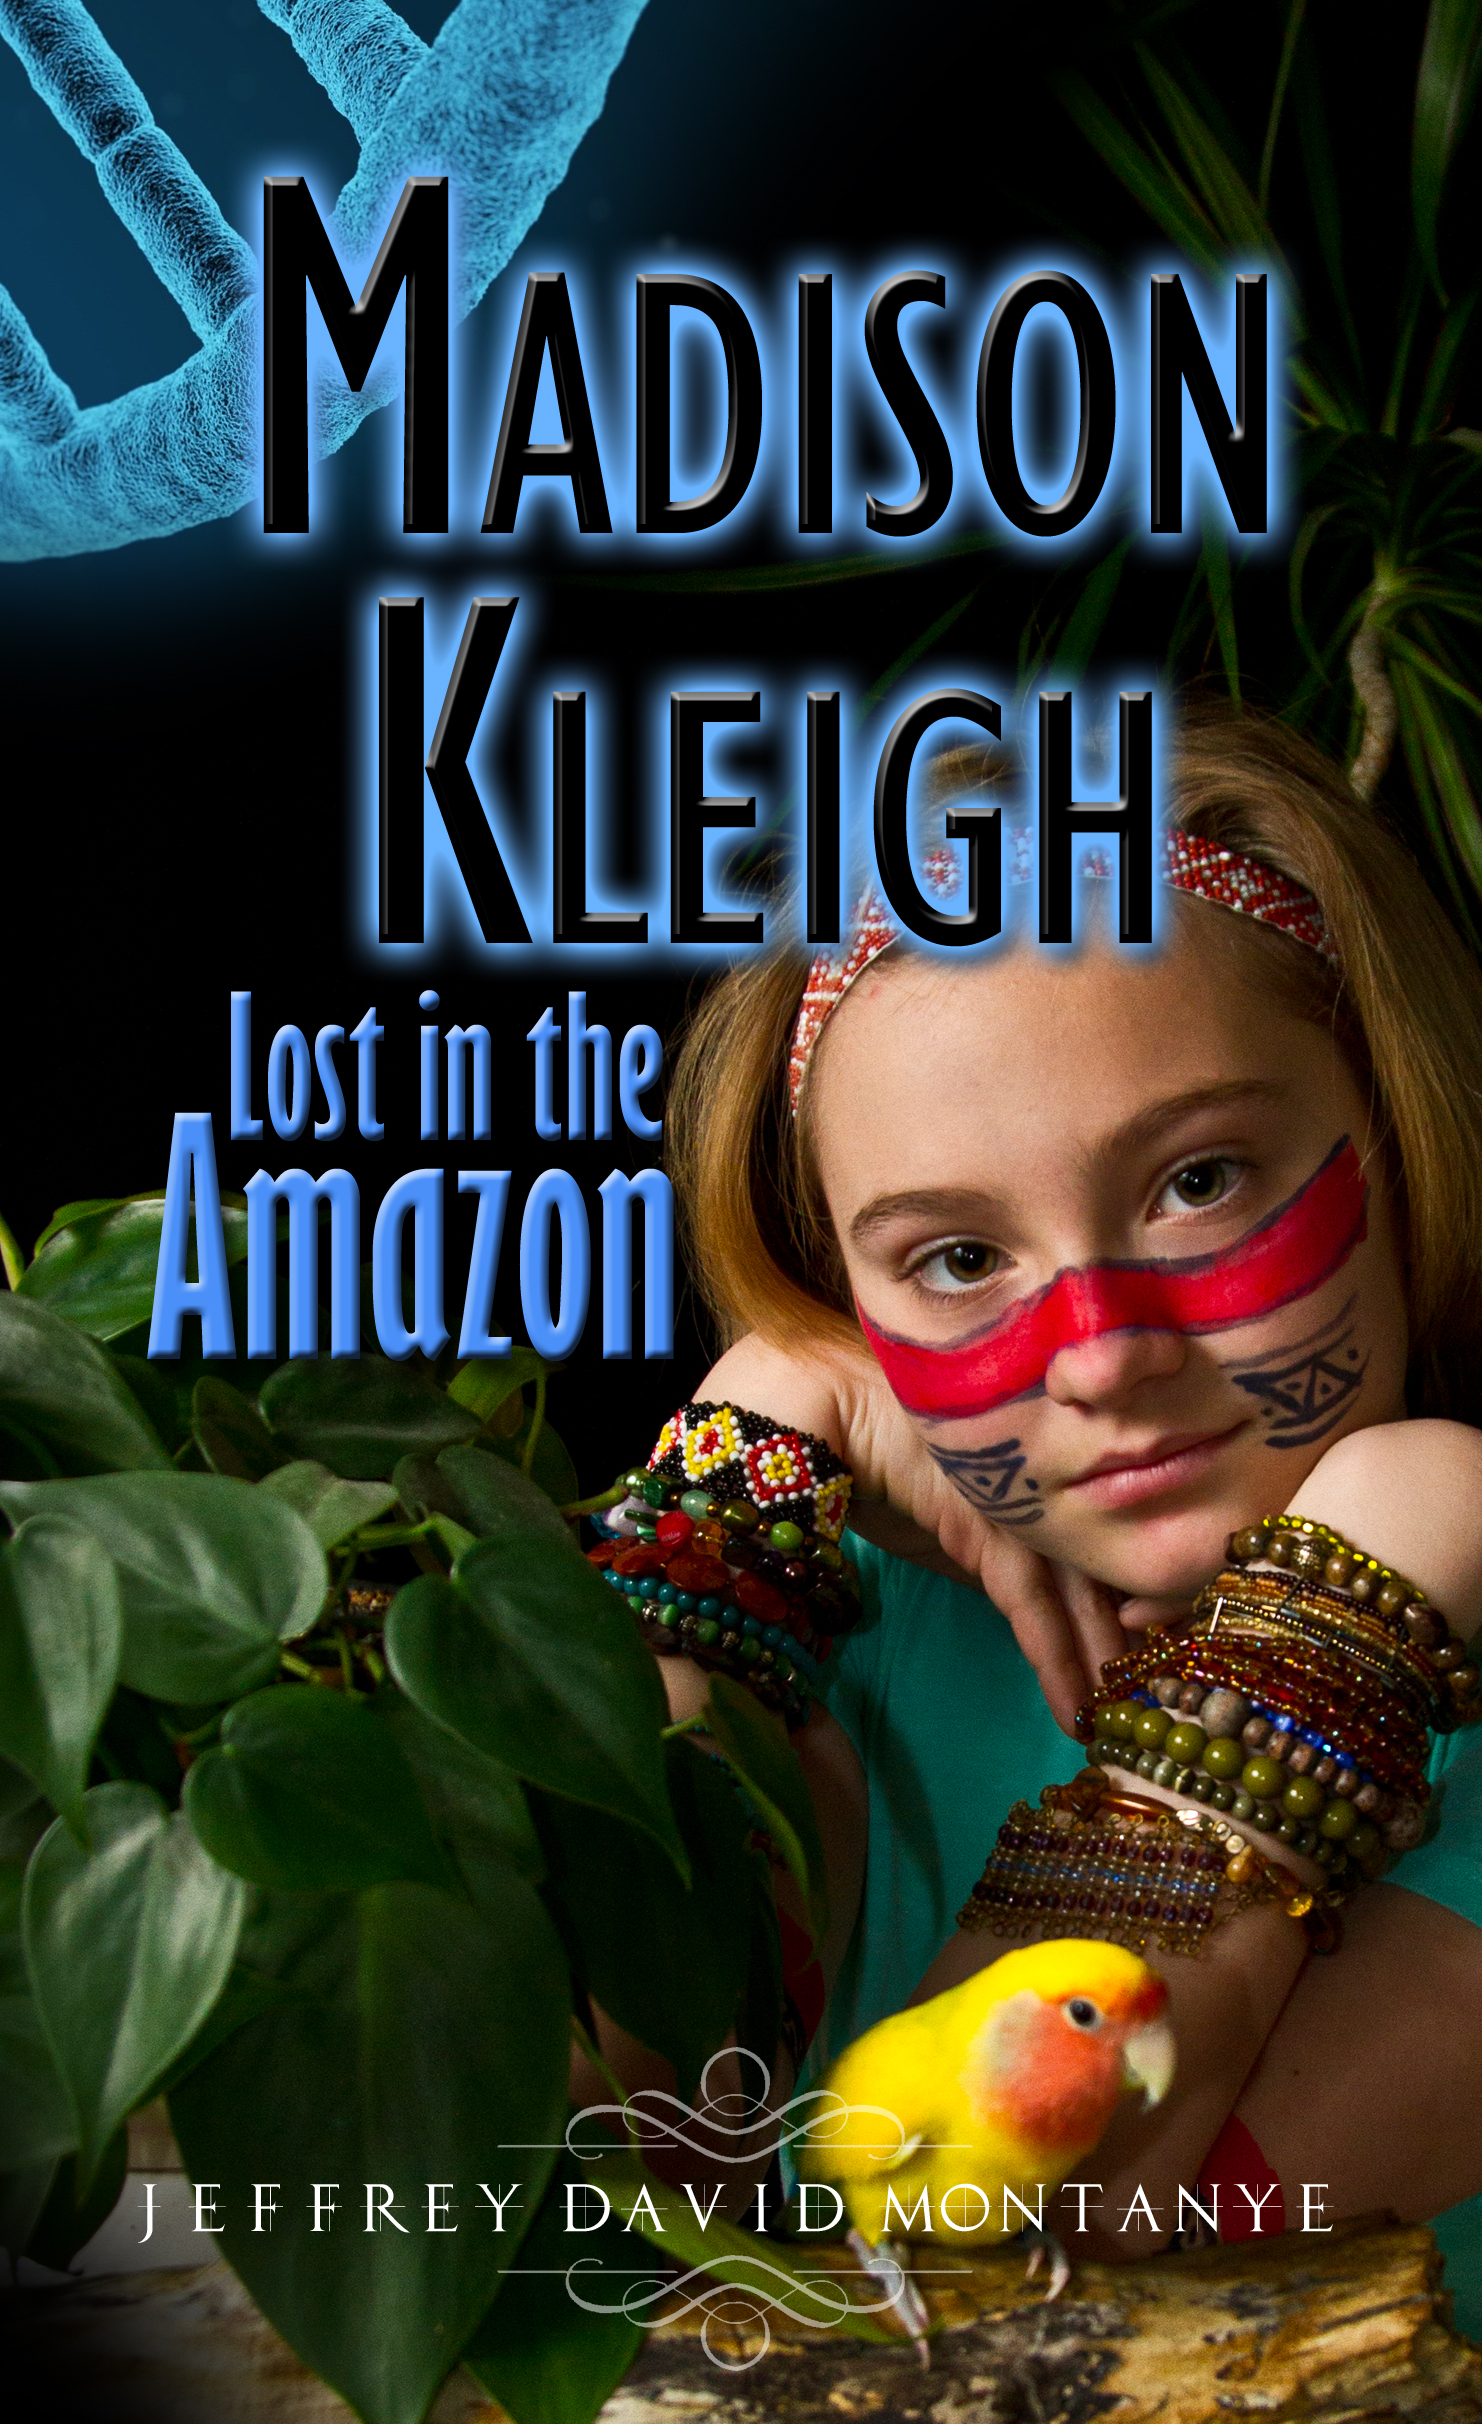 Madison Kleigh - Lost in the Amazon by Jeffrey David Montanye